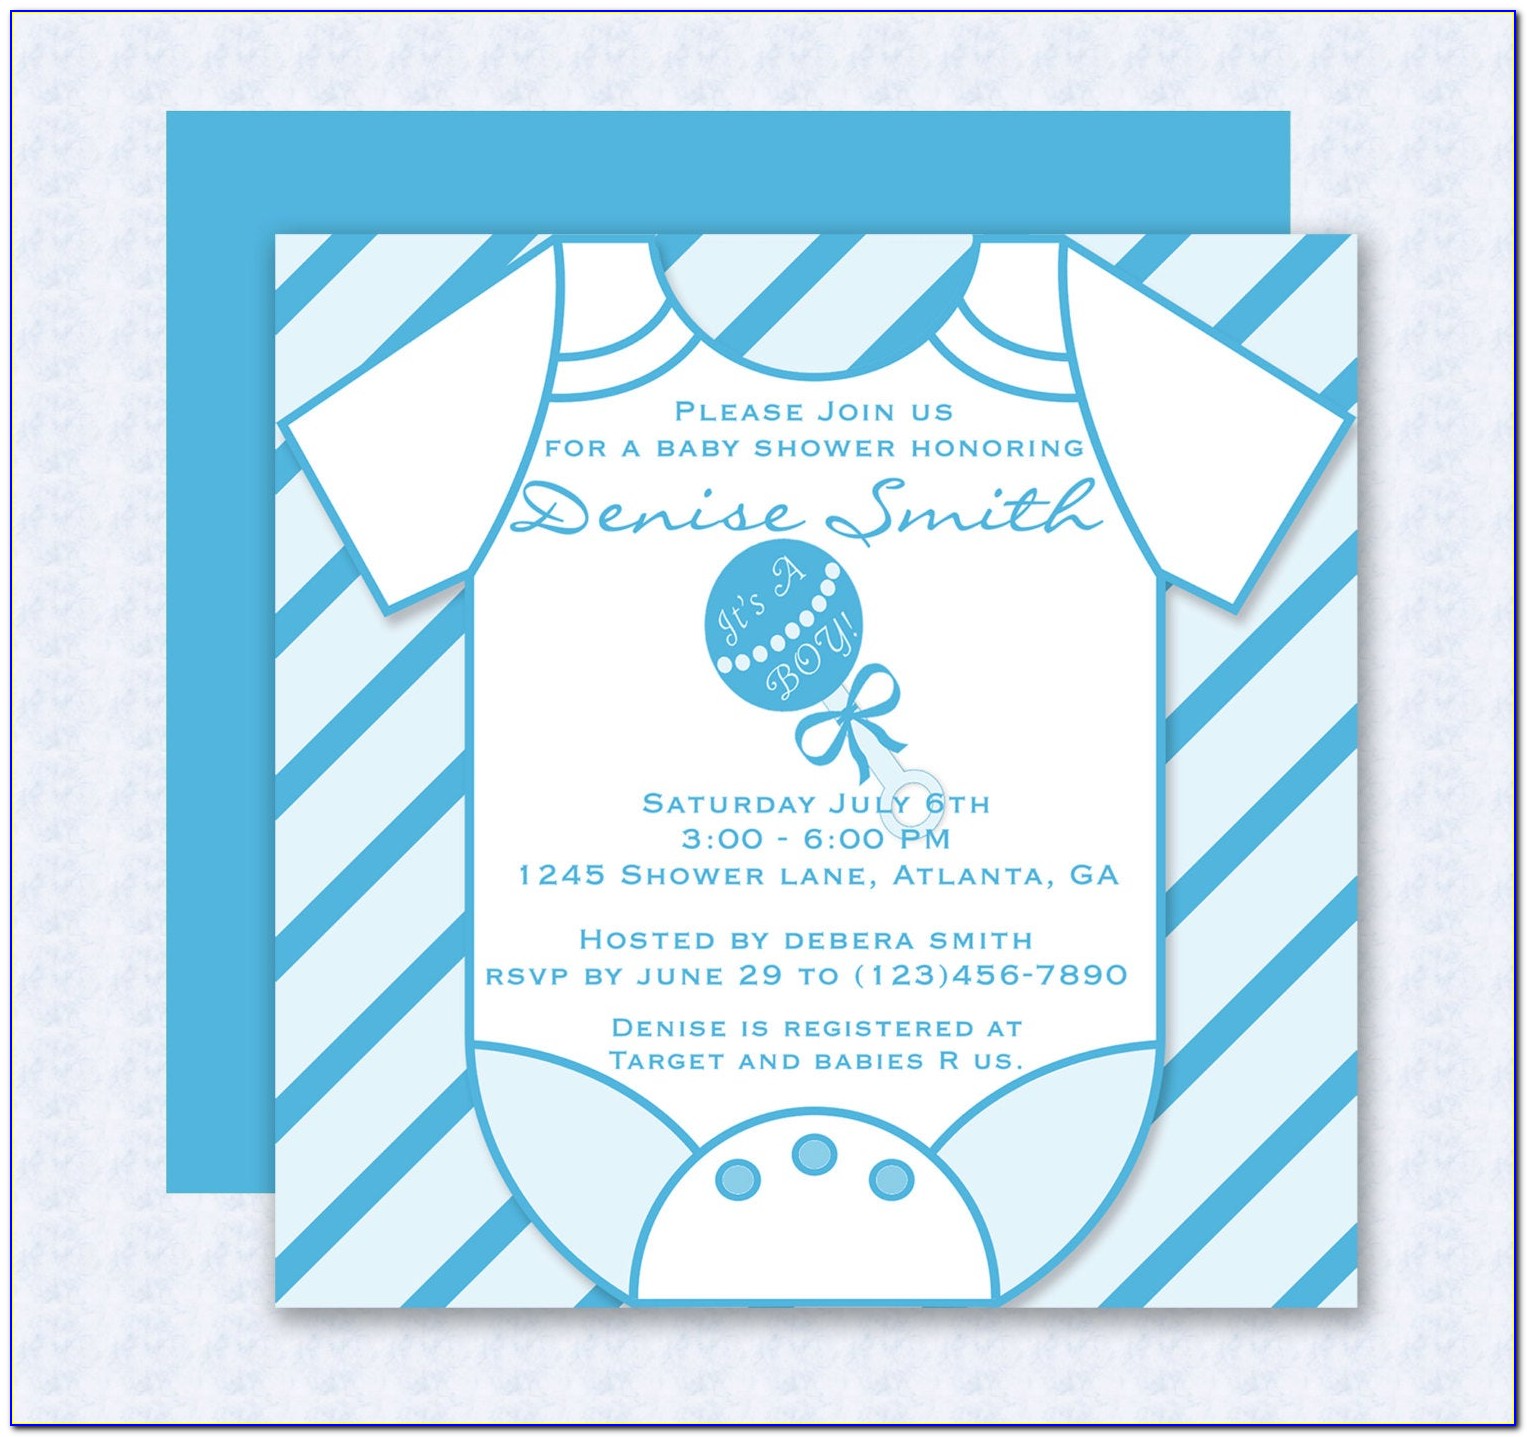 Sprinkle Baby Shower Invitations Templates